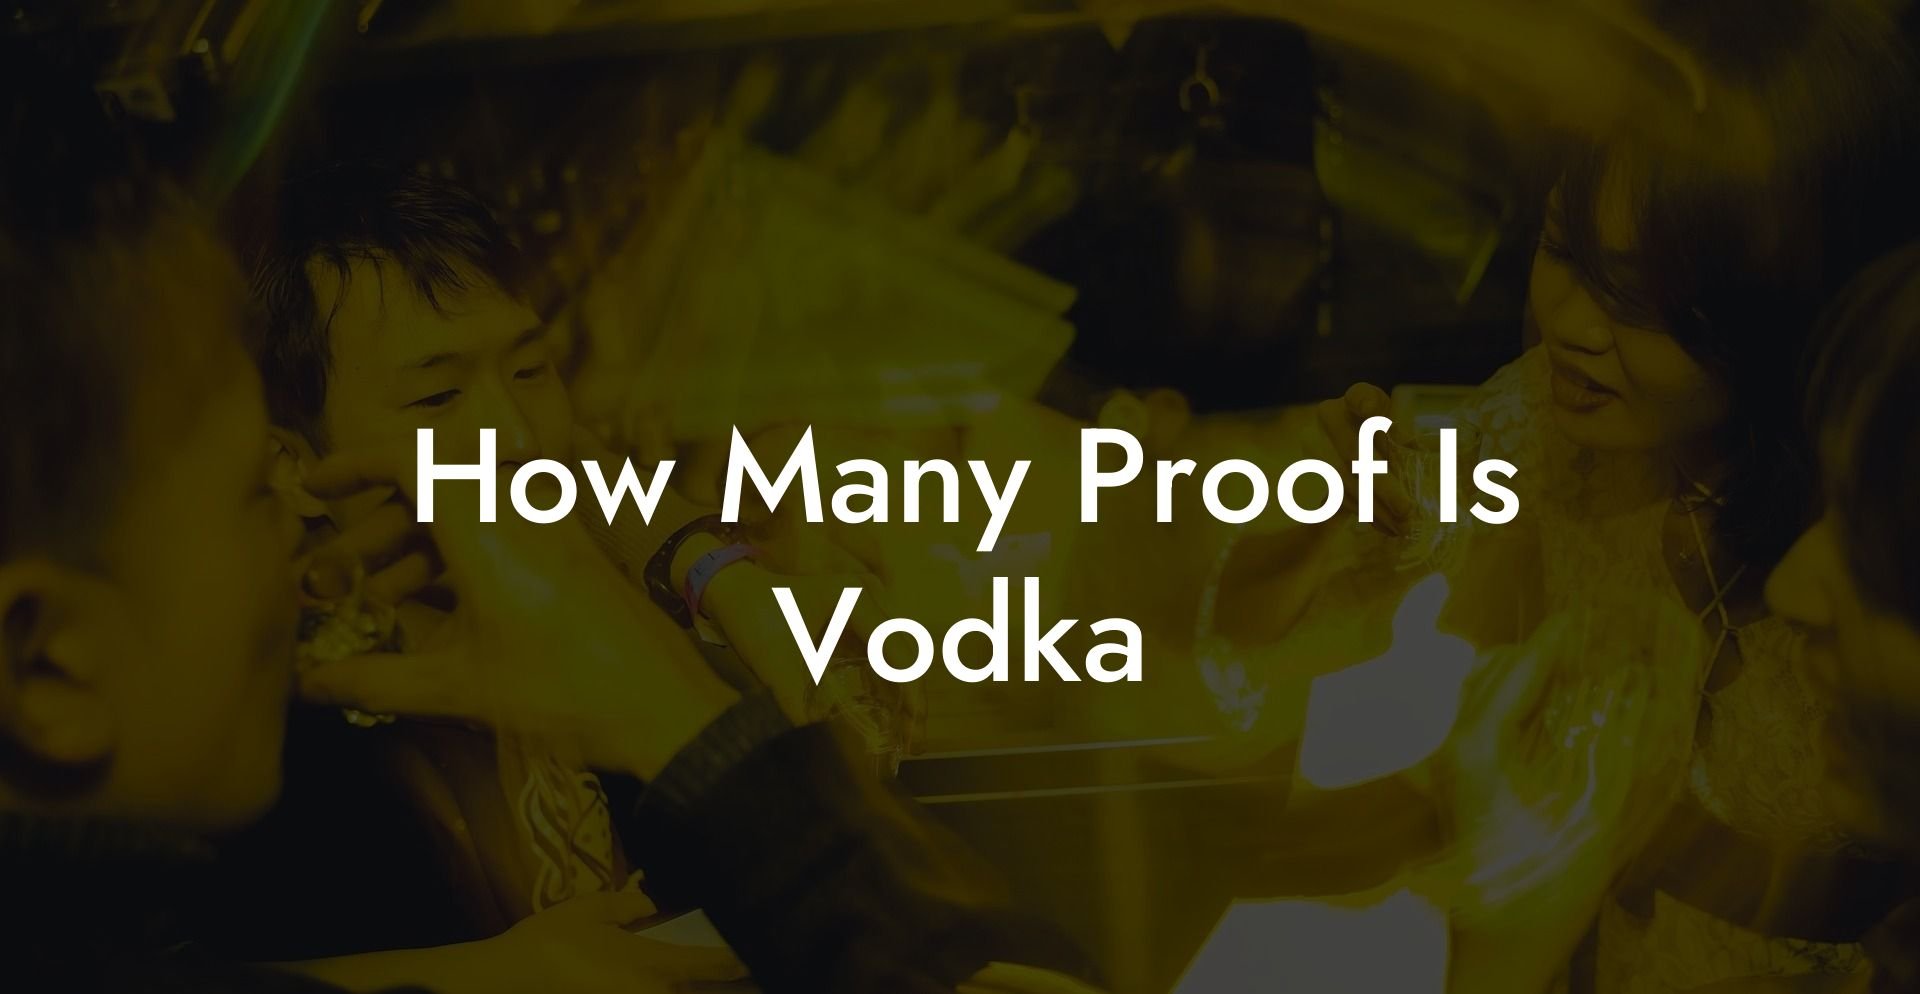 How Many Proof Is Vodka